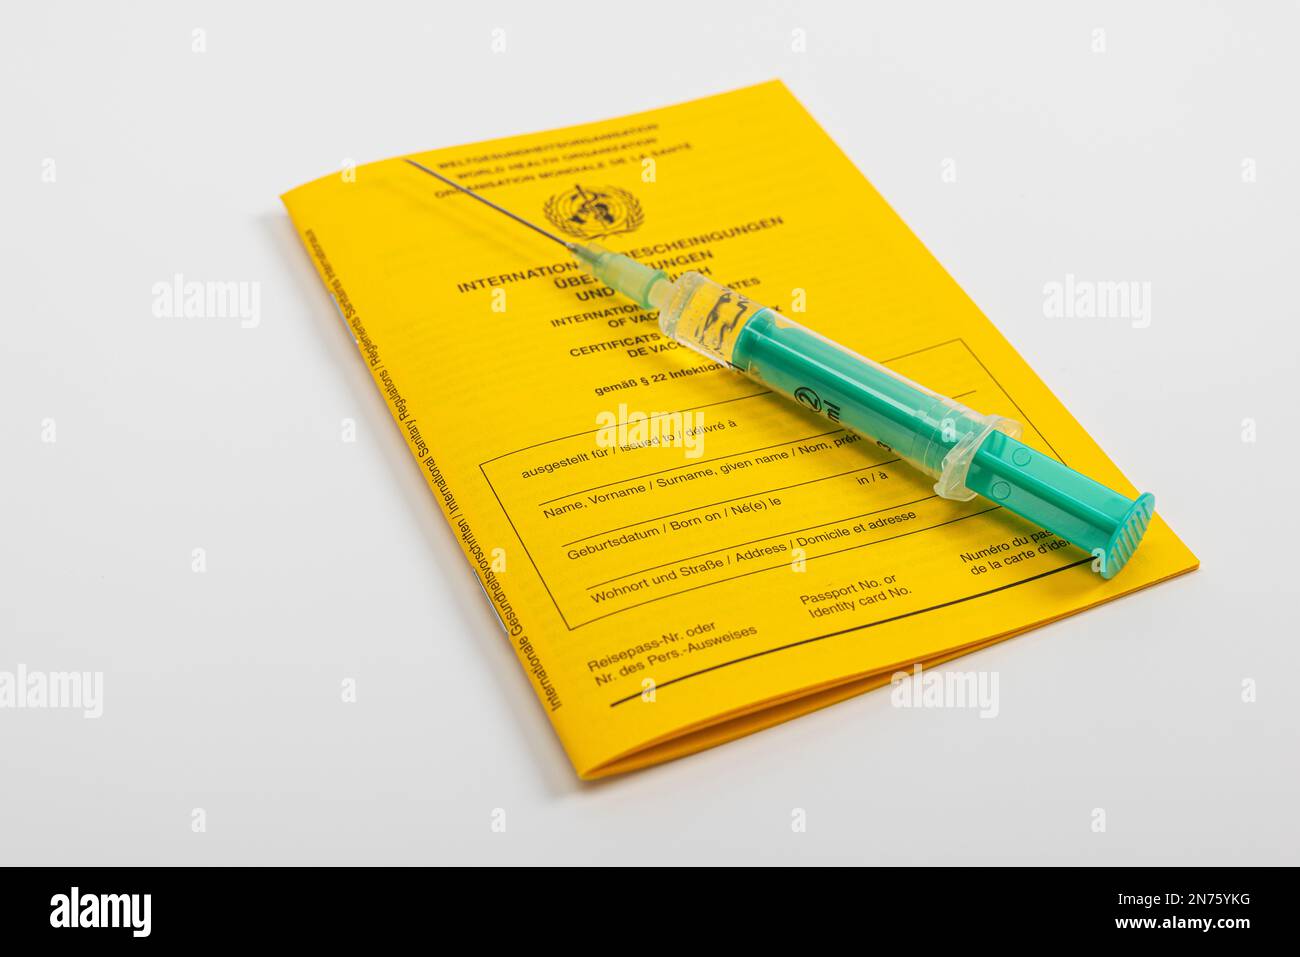 New vaccination card, international certificates of vaccinations, medical injection syringe, white background, Stock Photo